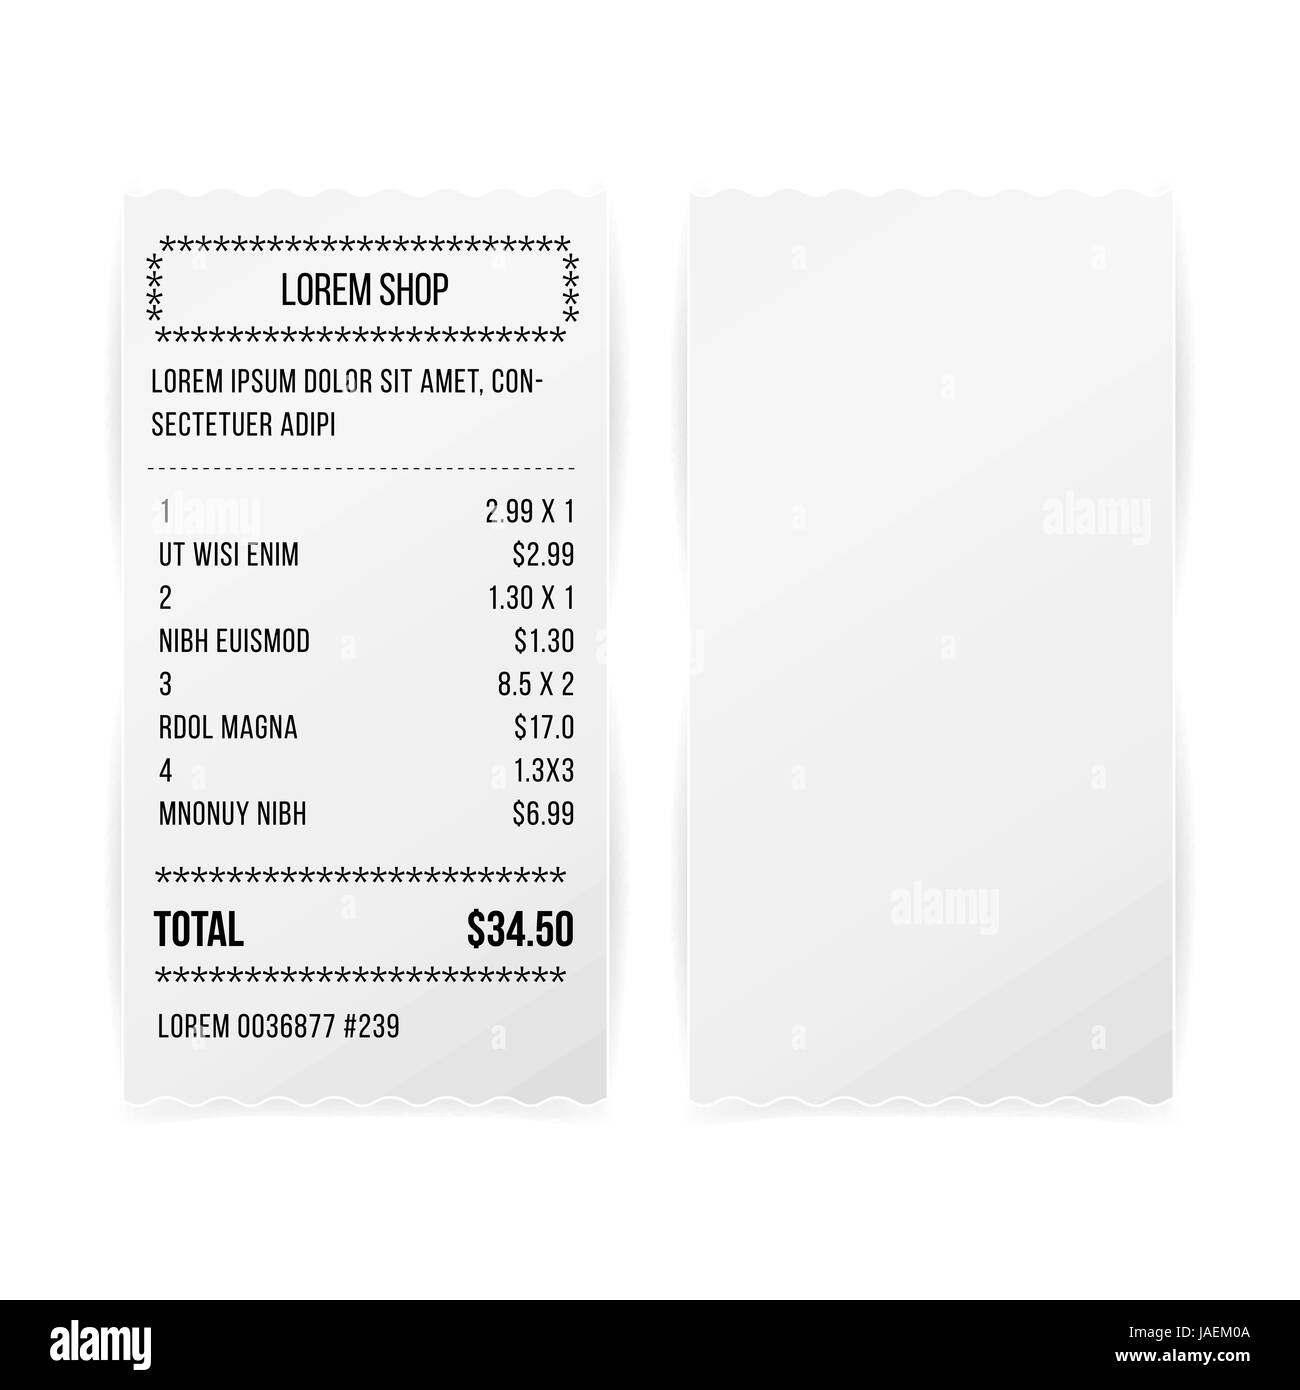 Sales Printed Receipt White Paper Blank Vector. Shop Reciept Or Bill Isolated On White Background. Realistic ATM Check Stock Vector